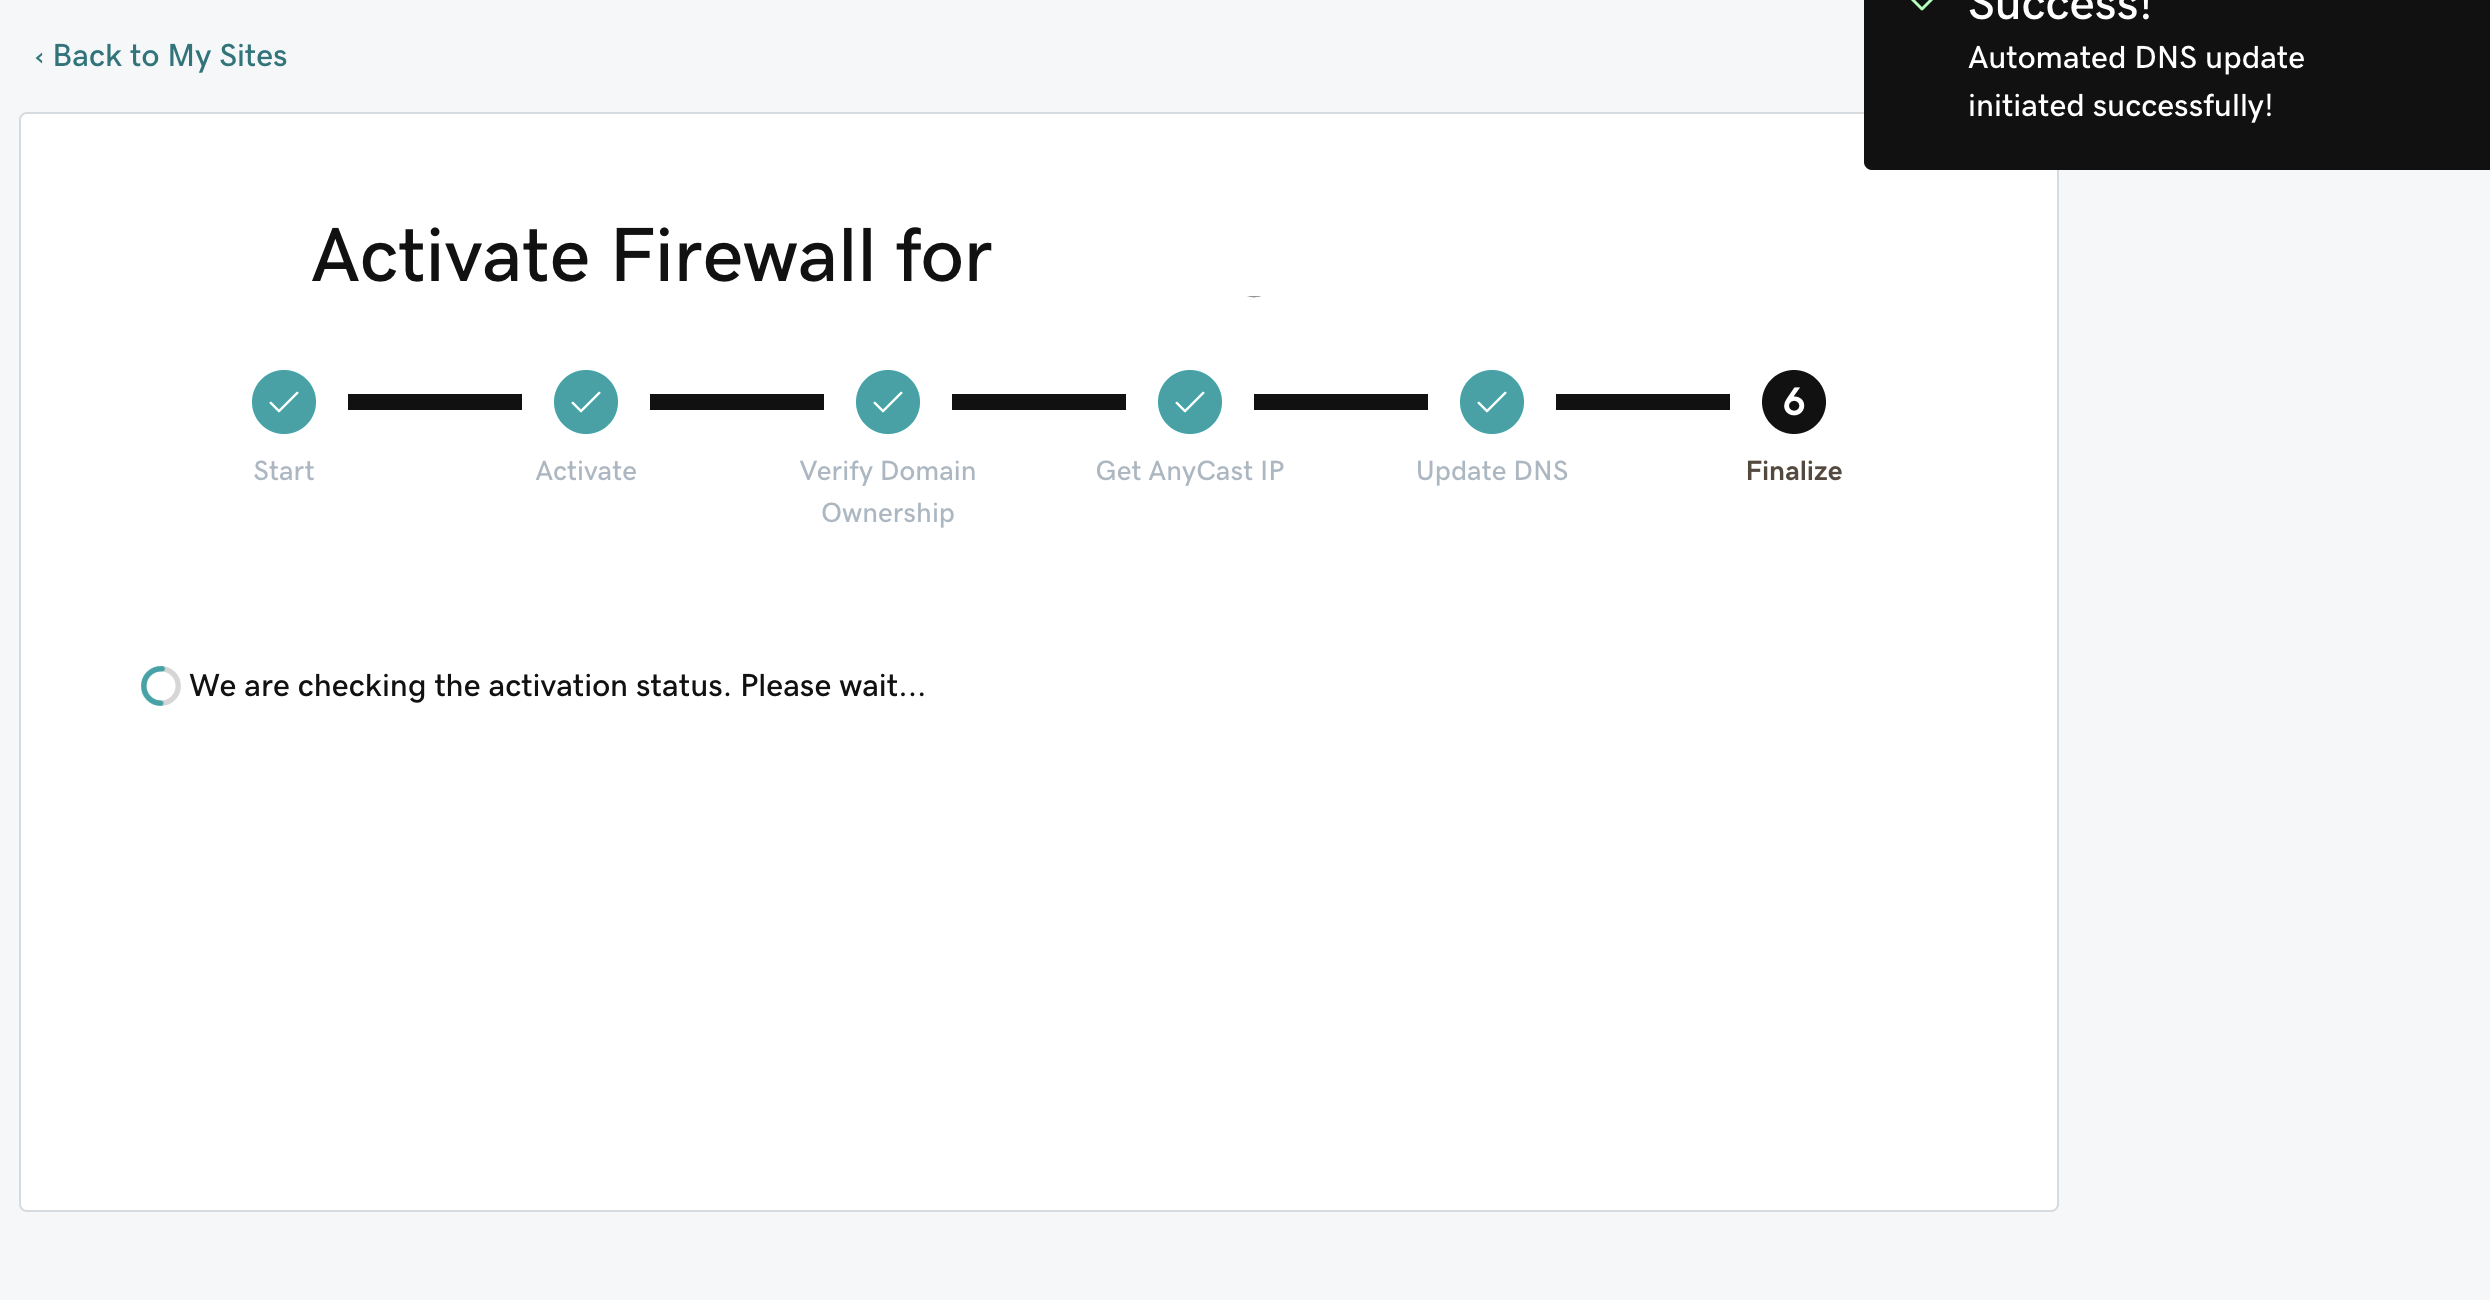 The firewall setup wizard with a successful message.